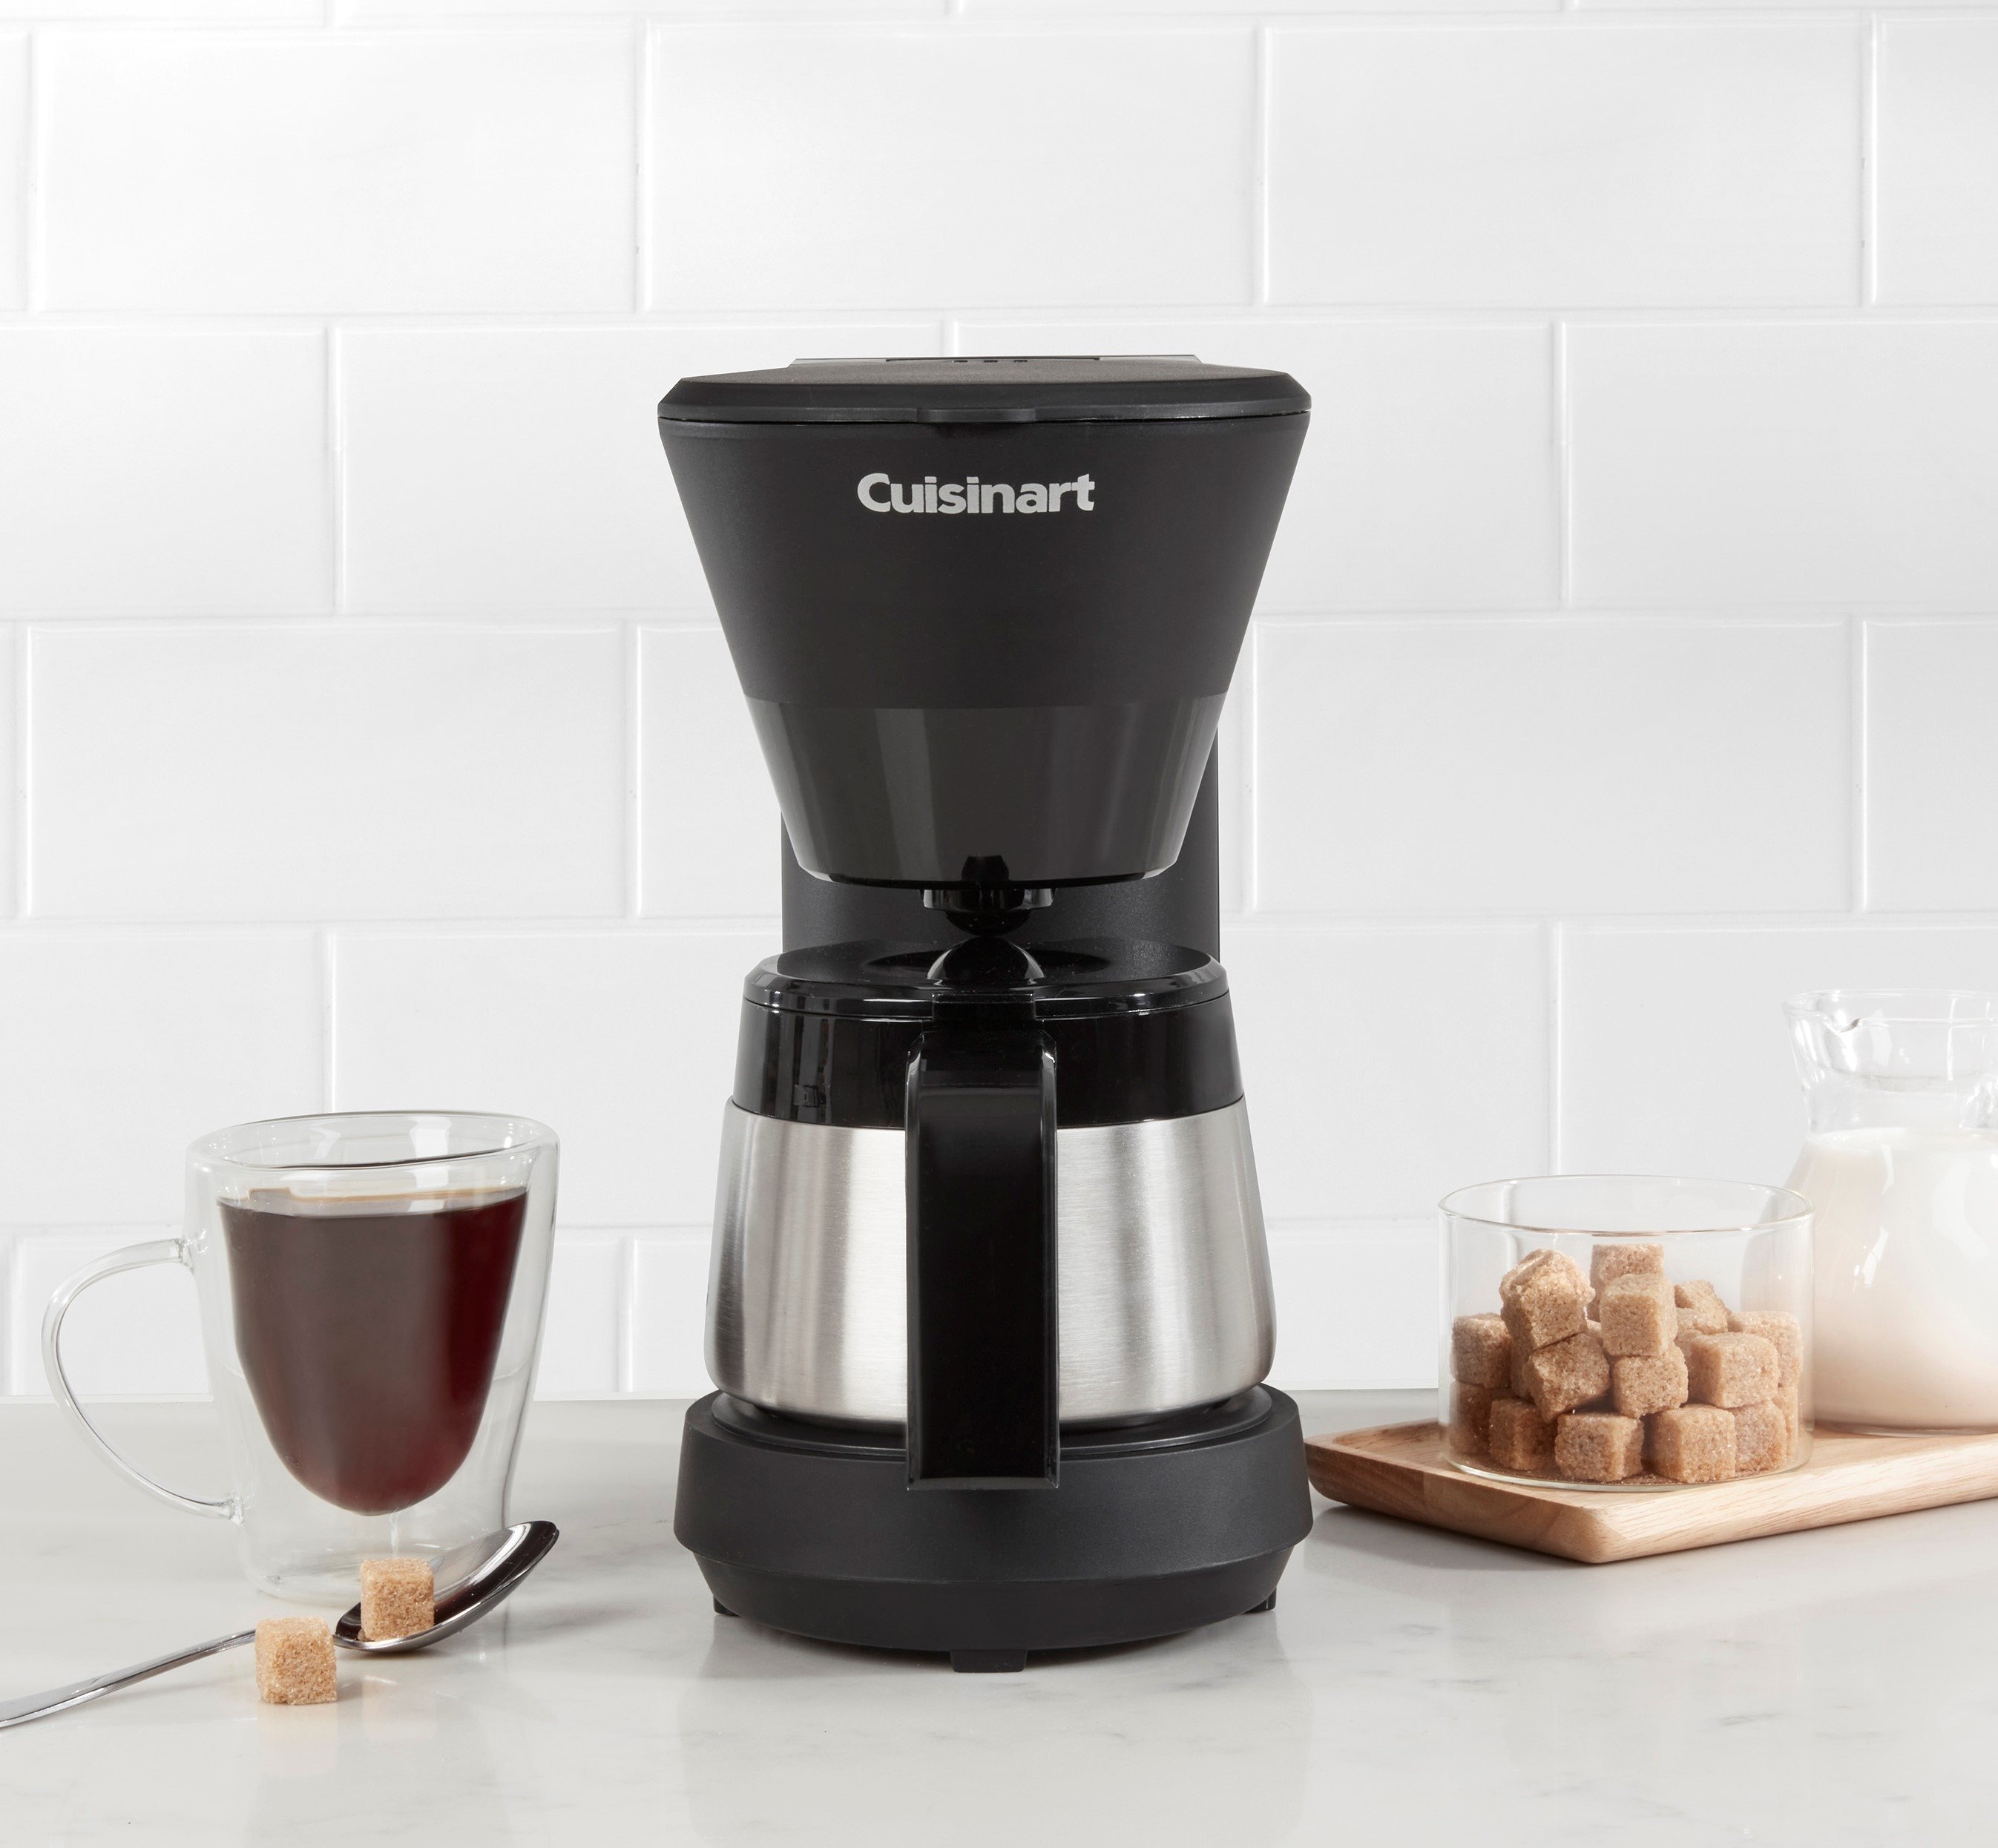 5-Cup Coffeemaker with Stainless Steel Carafe